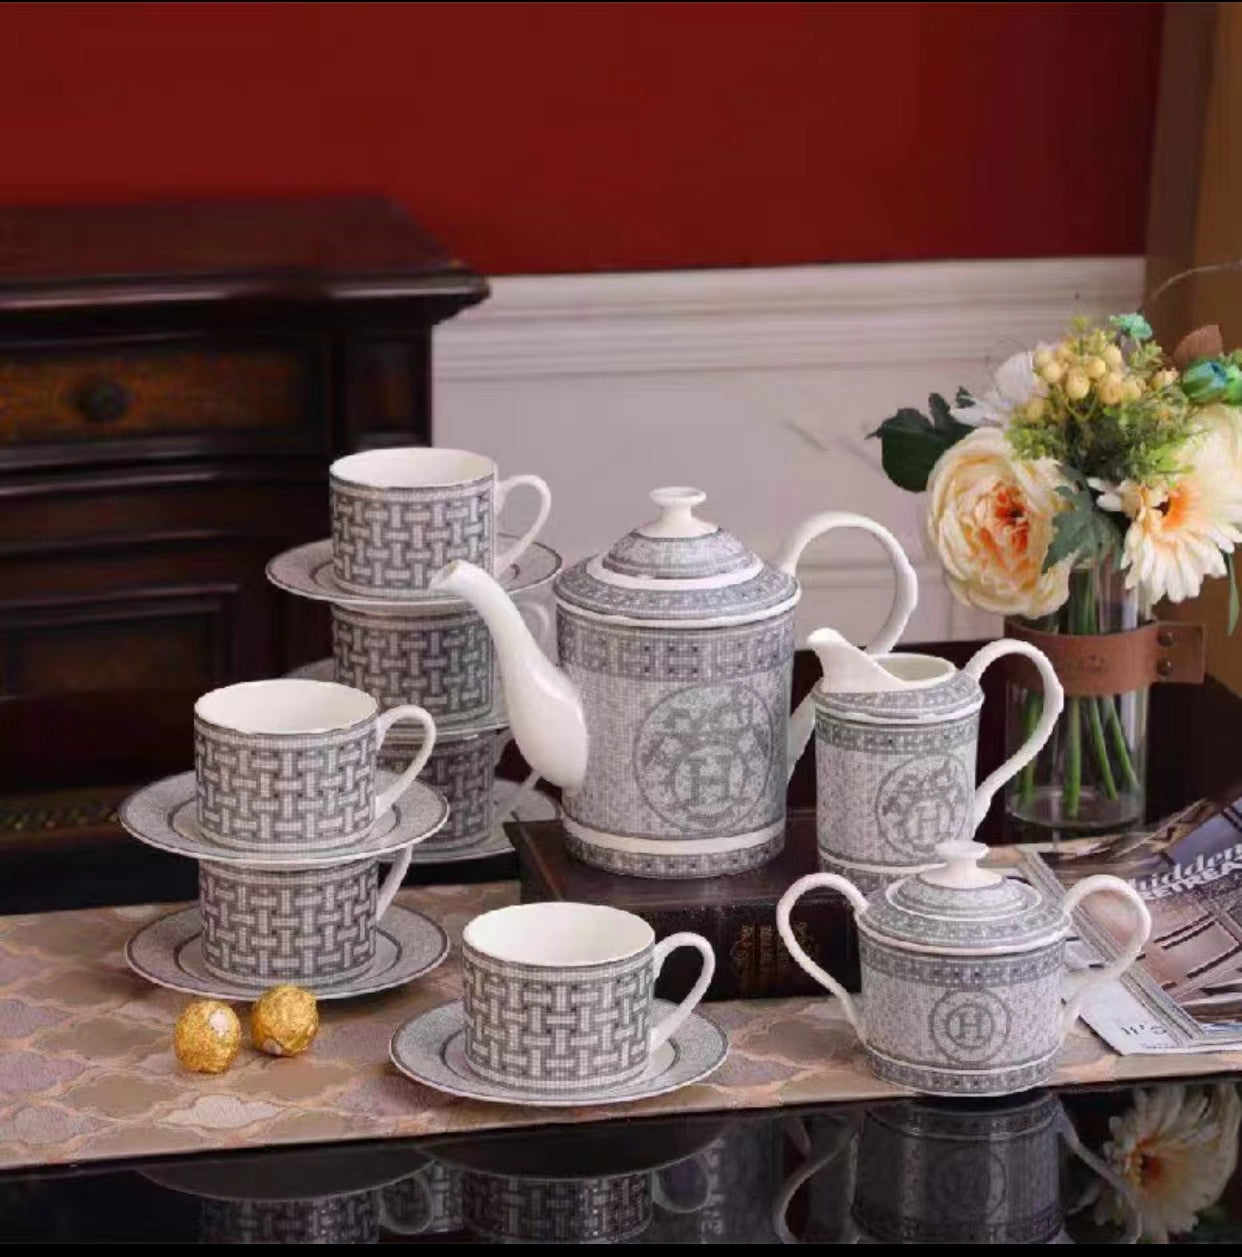 H Collection Dinnerware Fine China Ceramic Teacup Set - 4 Seasons Home Gadgets